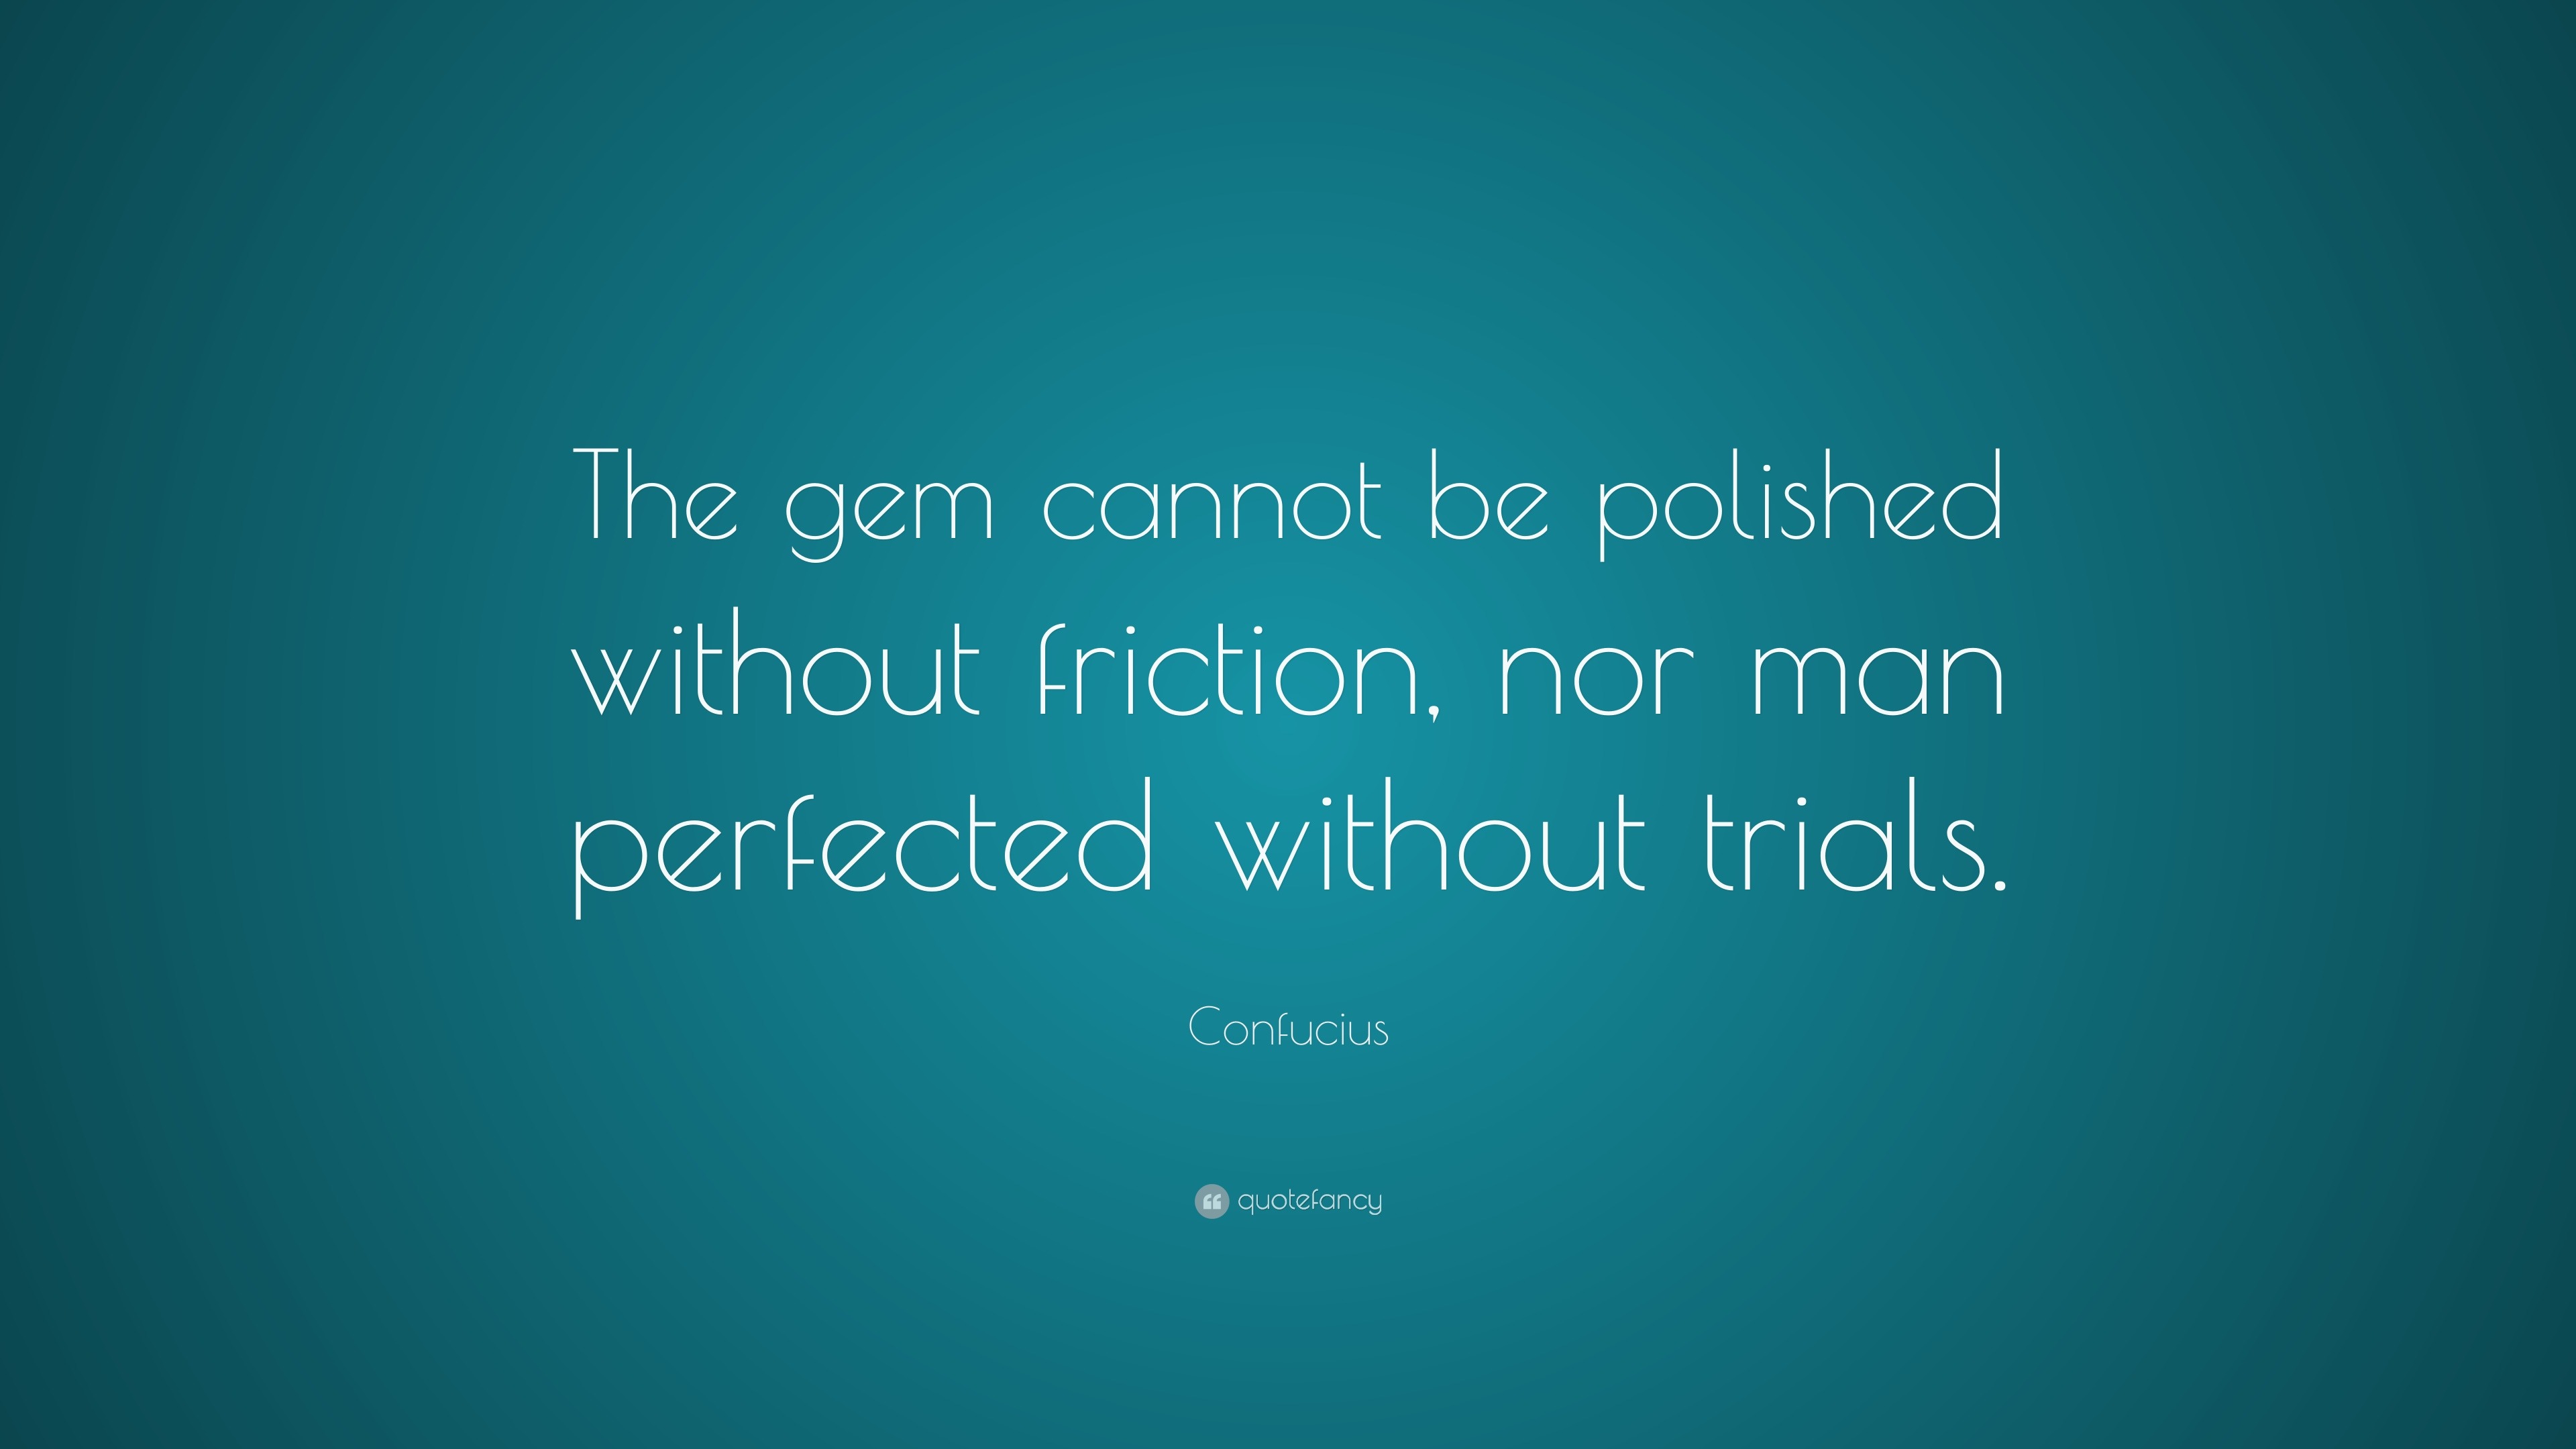 Confucius Quote The Gem Cannot Be Polished Without Friction Nor Man Perfected Without Trials